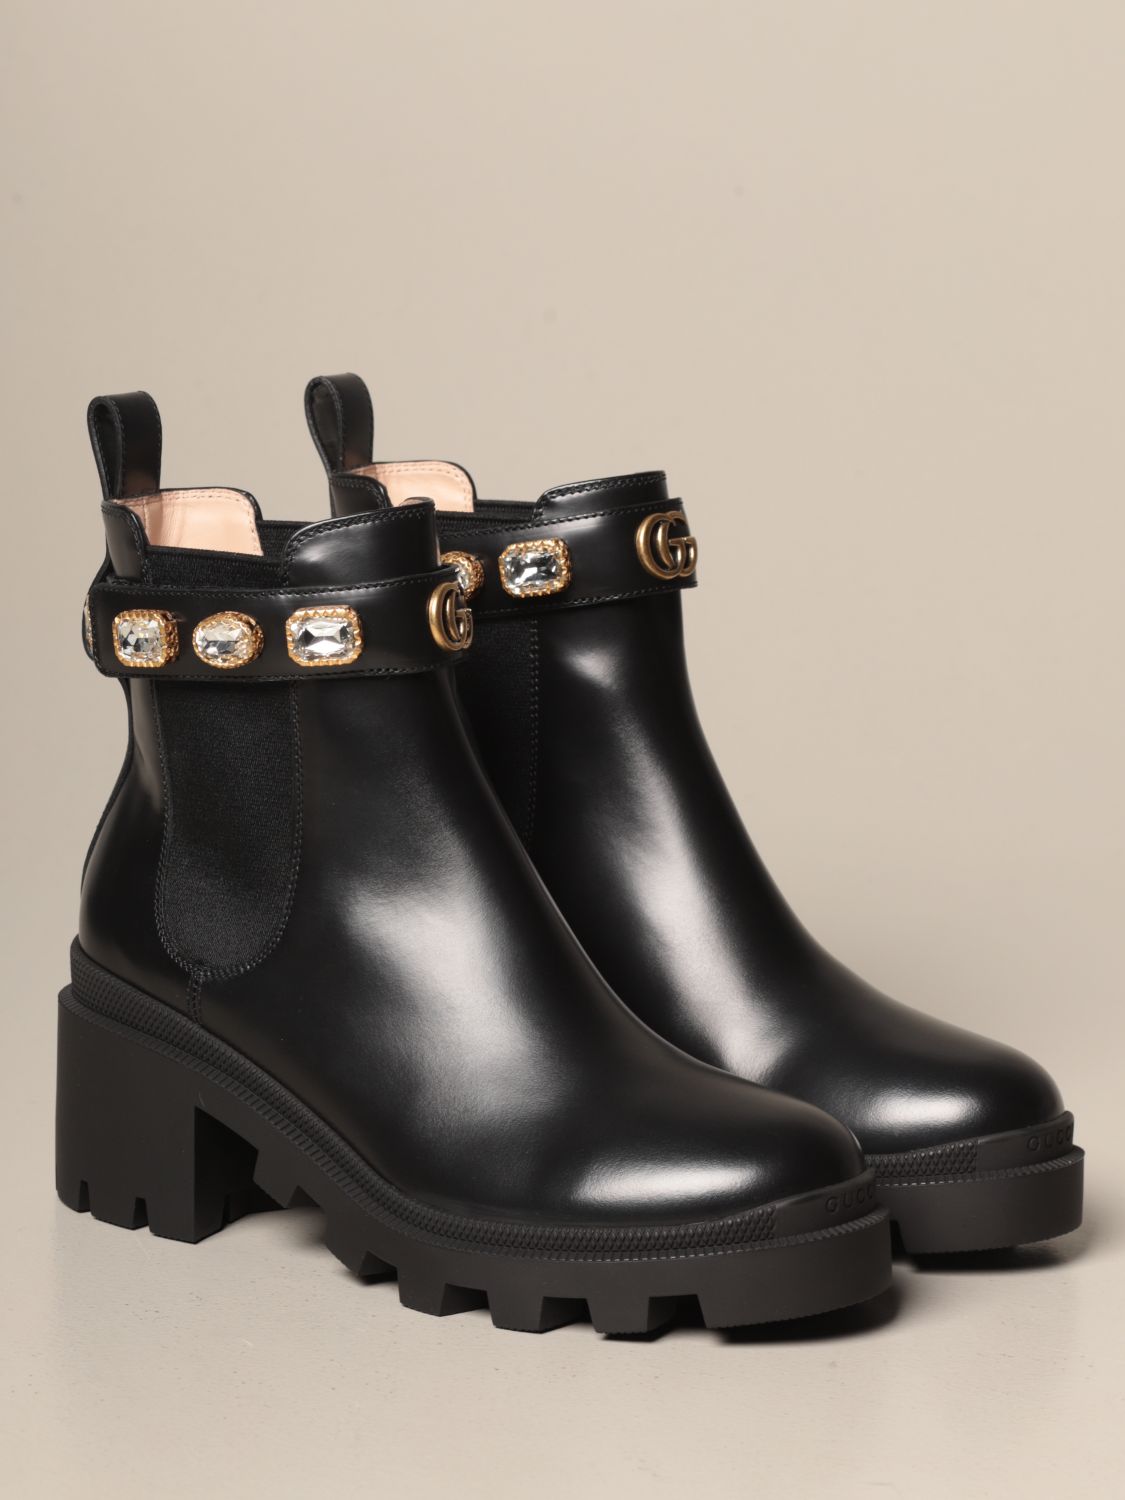 GUCCI: leather ankle boot with rhinestone strap - Black | Gucci flat booties  550036 DKS00 online on 